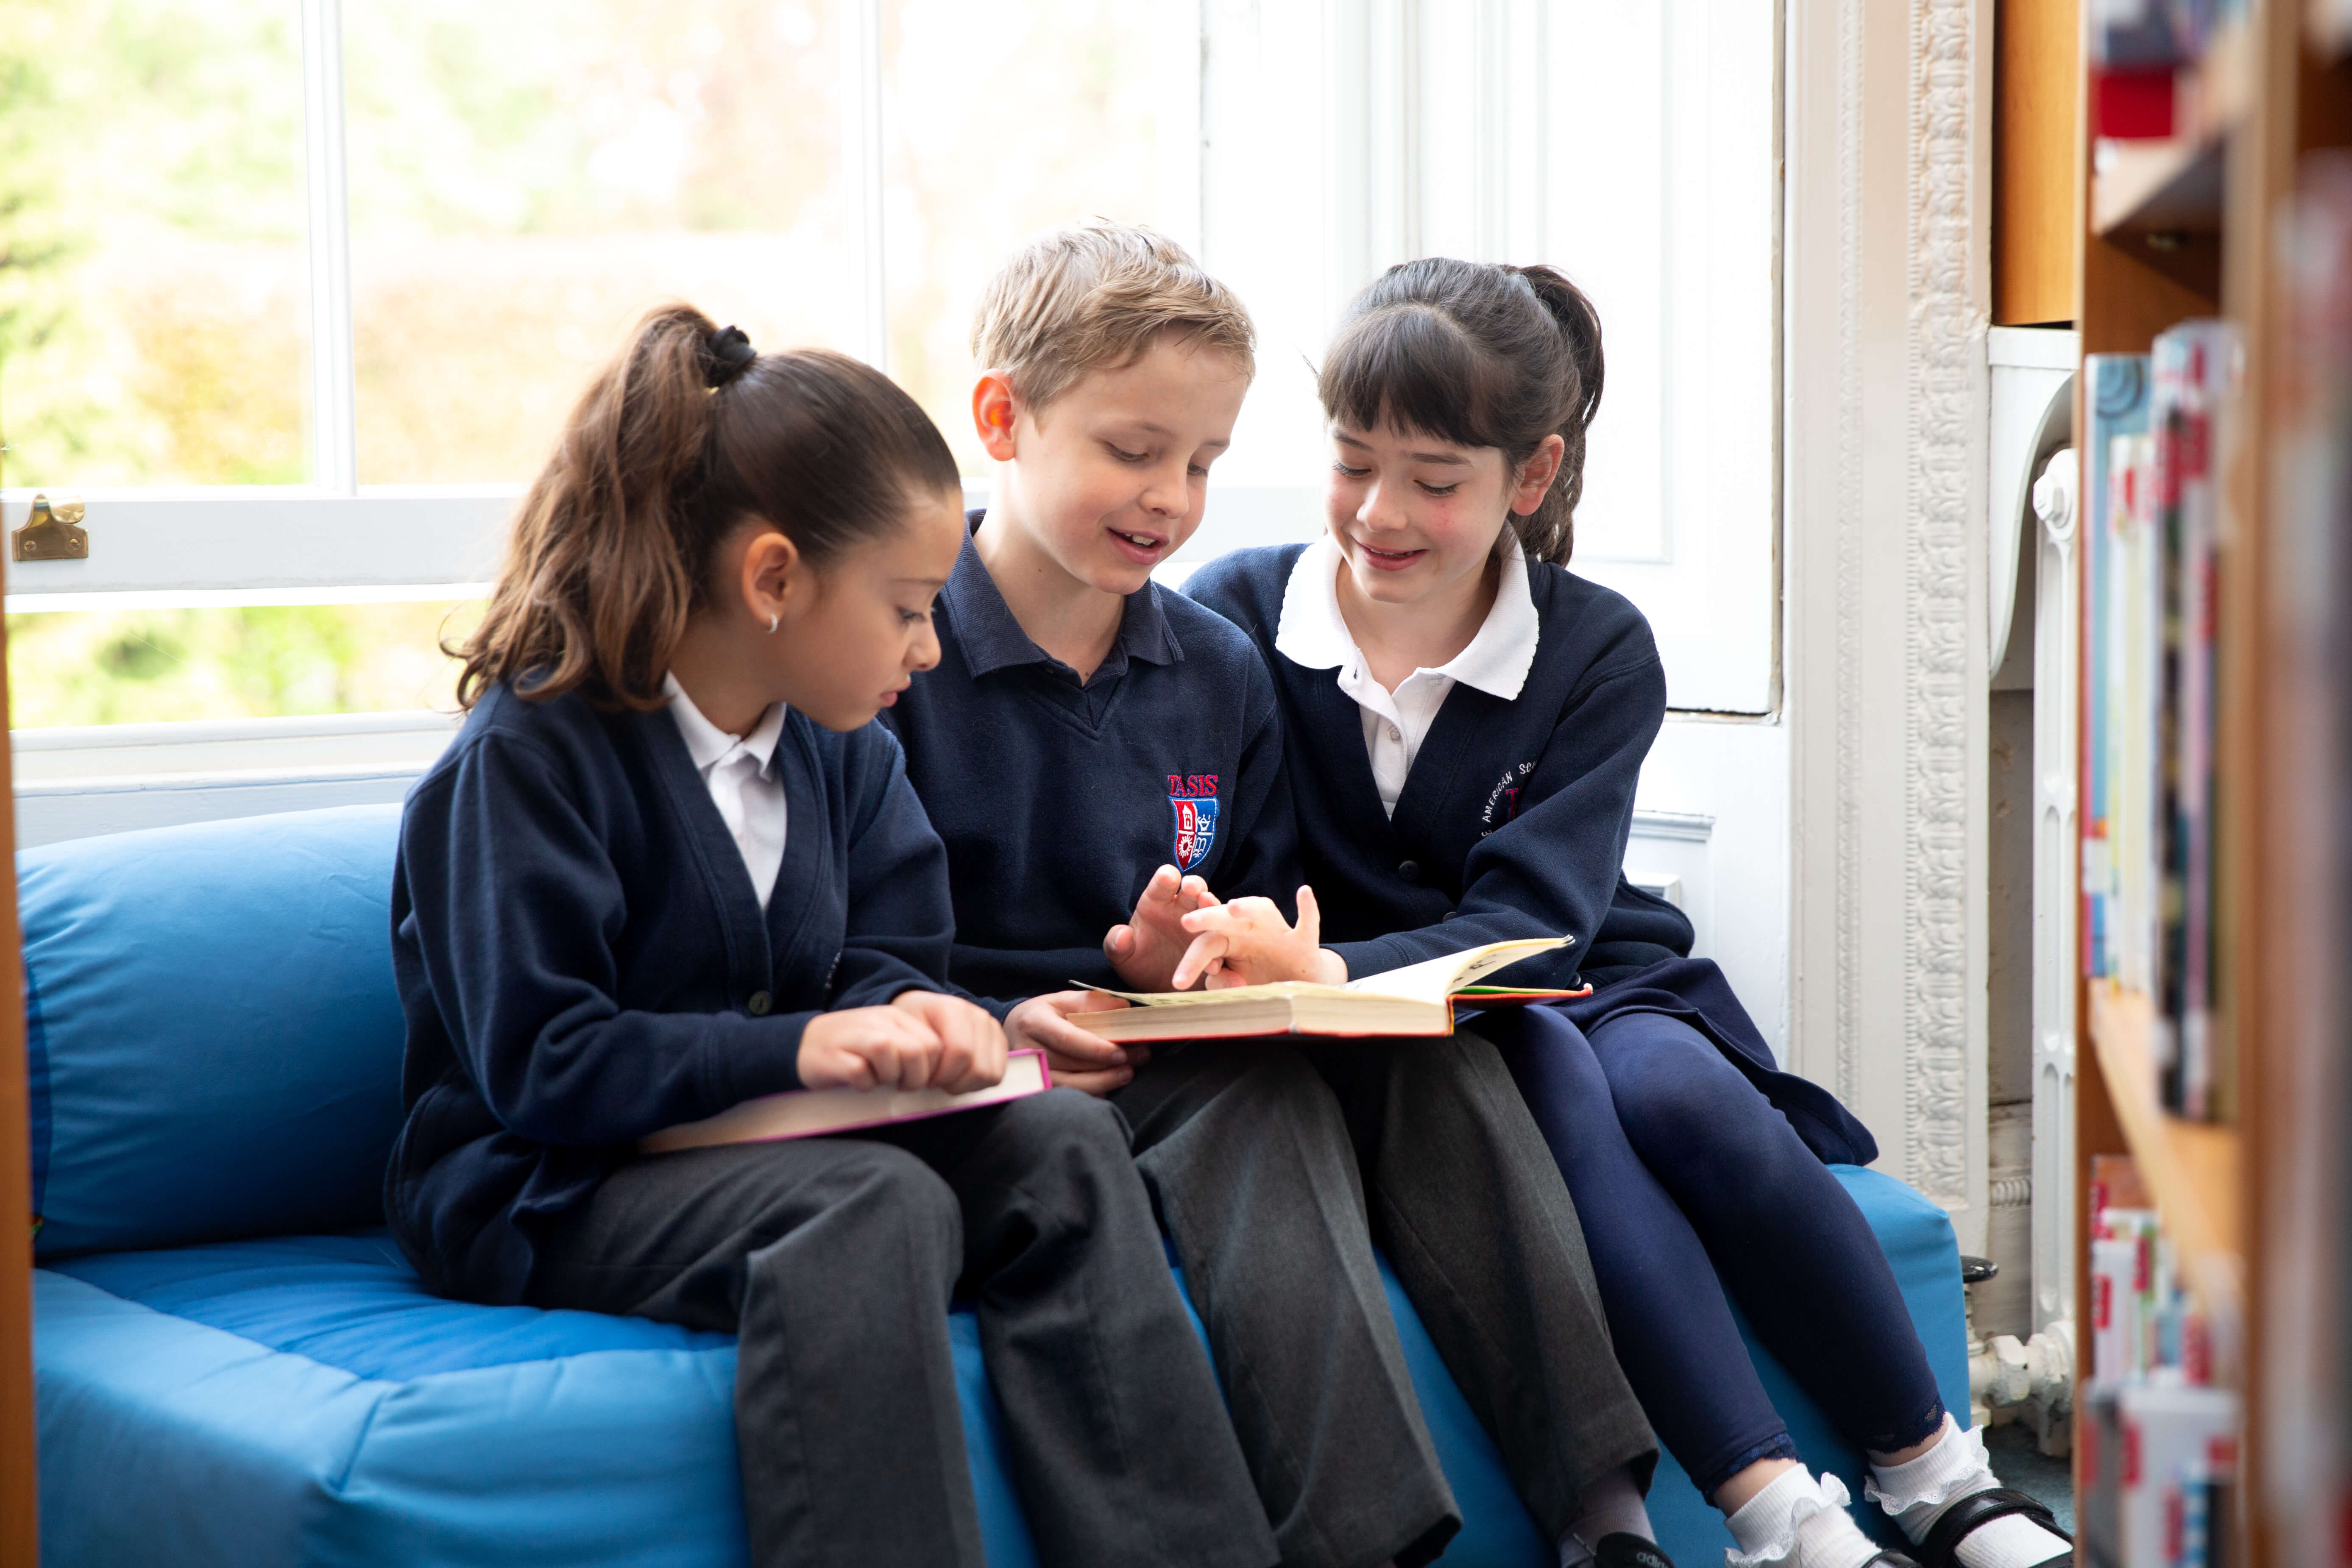 Build character and foster excellence at these UK schools